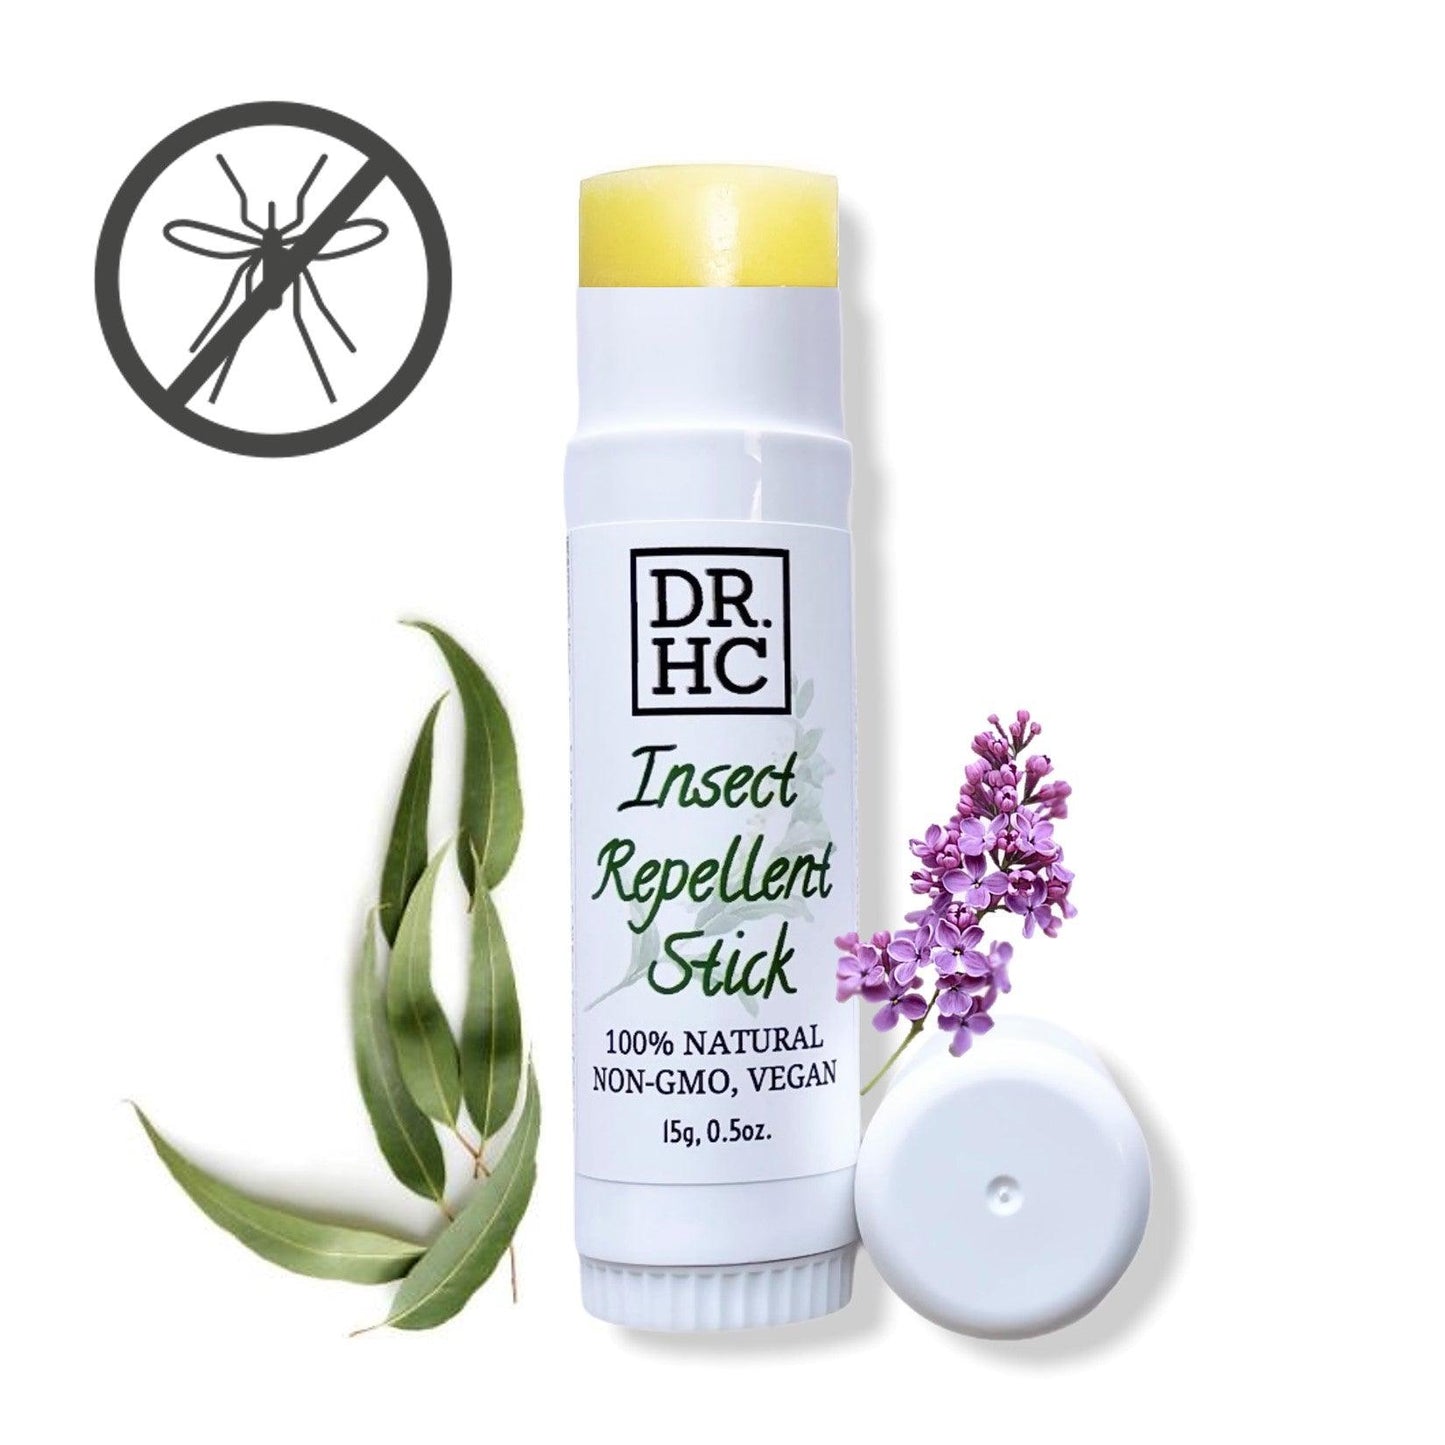 DR.HC All-Natural Insect Repellent Stick (15g, 0.5oz.)